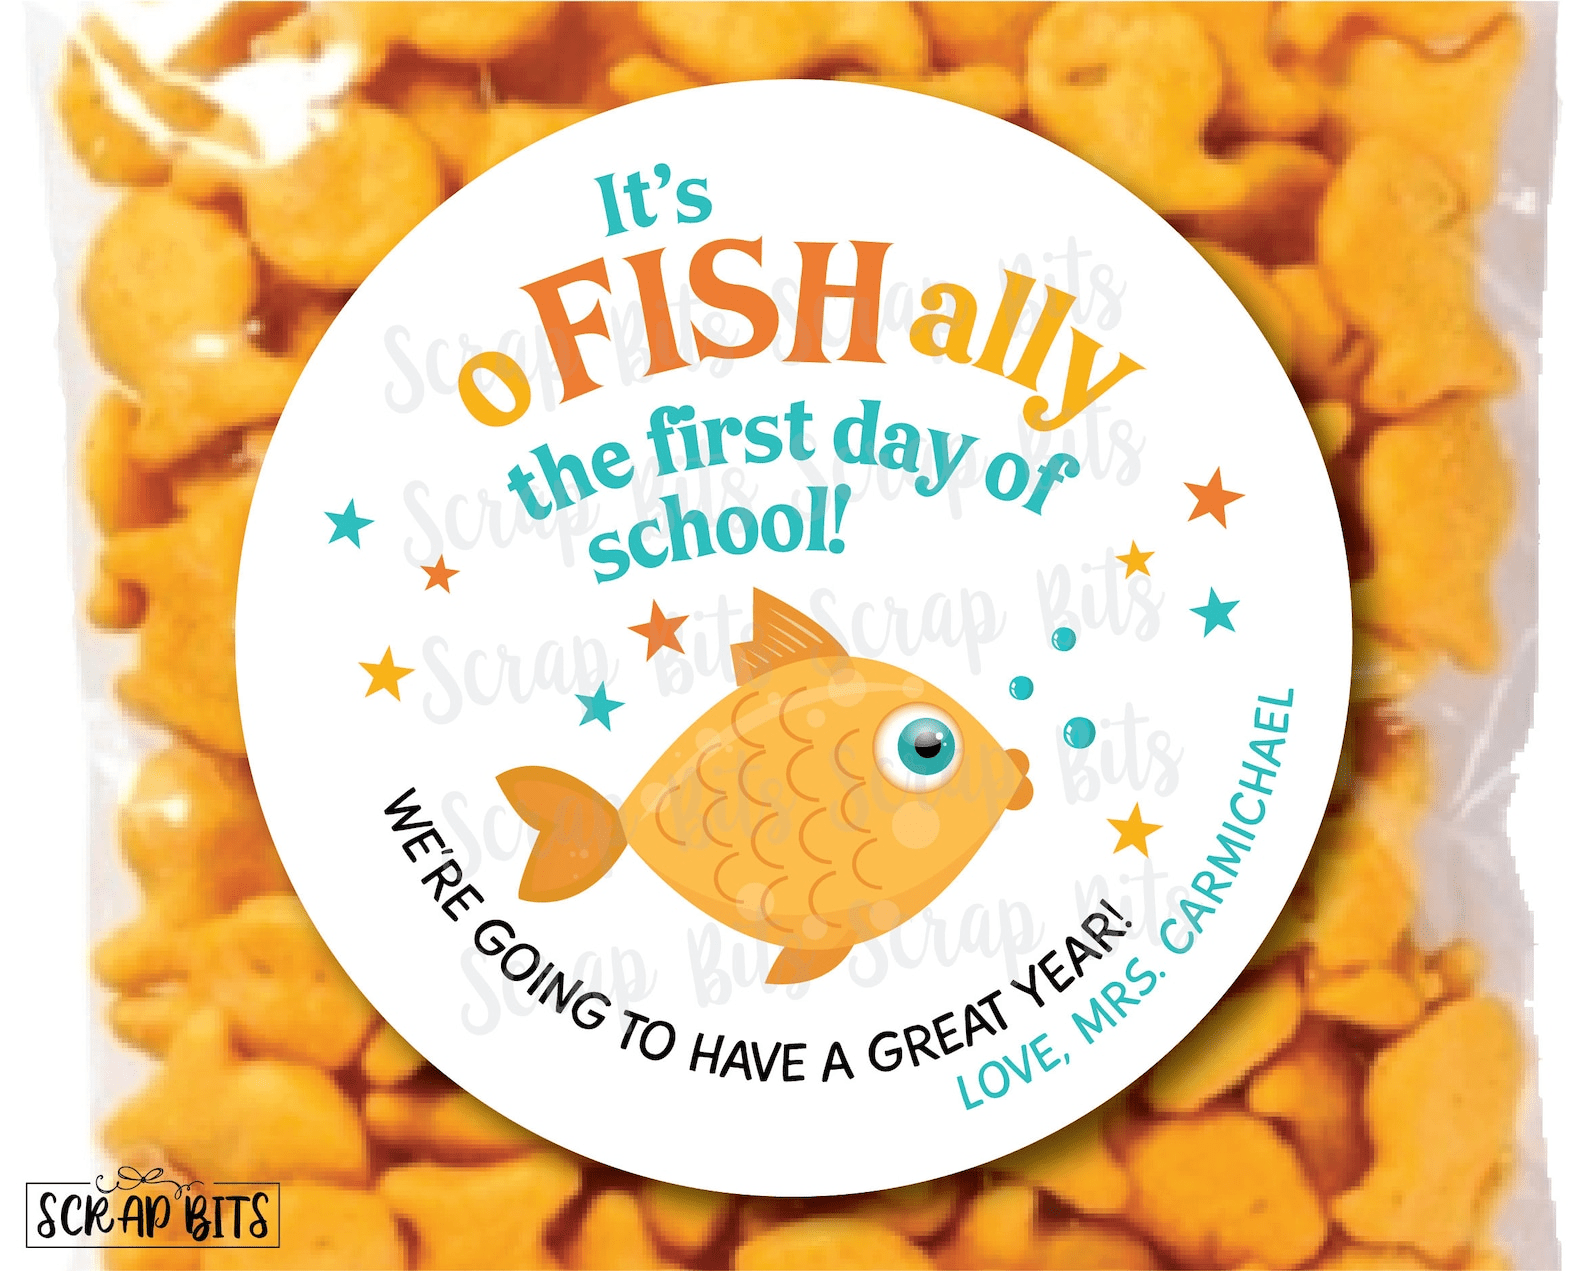 O-Fish-Ally First Day of School Stickers . Printable Back To School Labels, Instant Download Editable Template - Scrap Bits